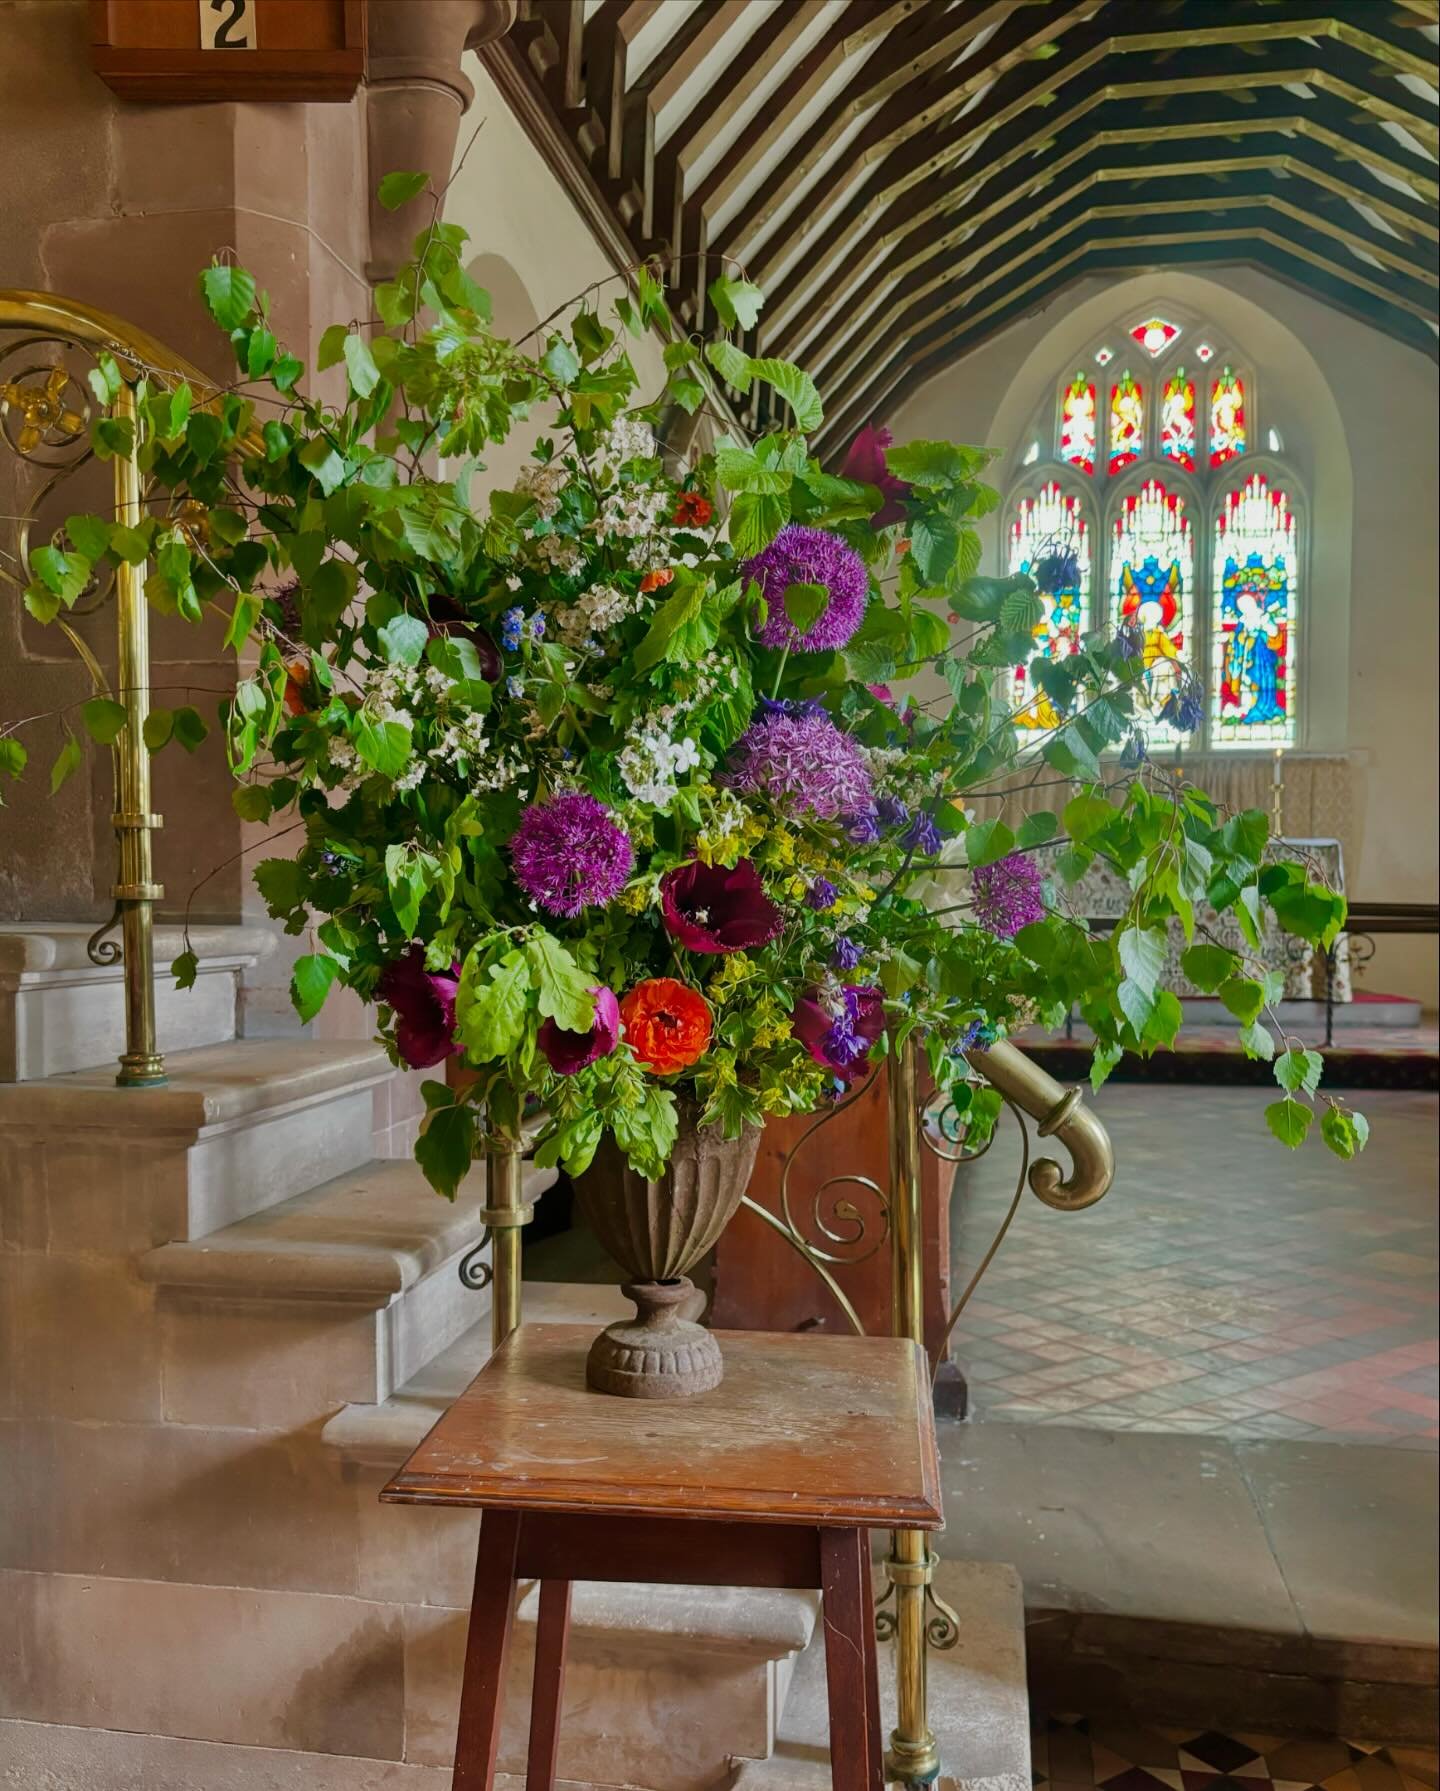 This arrangement took part in two events yesterday. In the morning @farewellflowers held their first promotional photoshoot with @wild_meadow at Waseley Hills Crematorium. Members of the new directory, launched this week, gathered with their beautifu